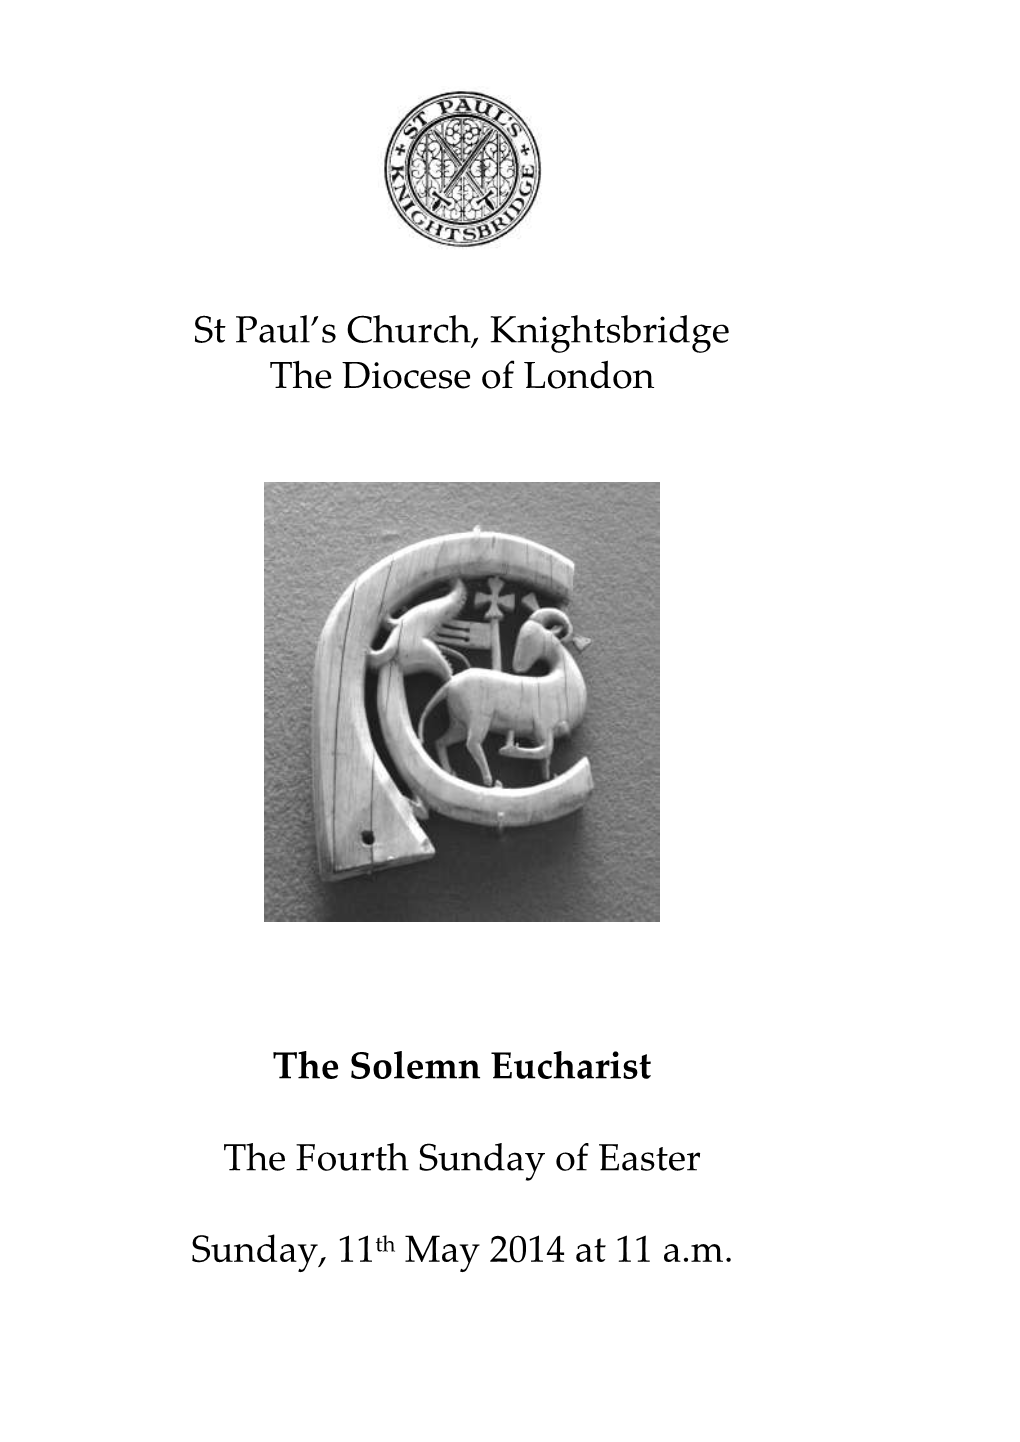 St Paul's Church, Knightsbridge the Diocese of London the Solemn Eucharist the Fourth Sunday of Easter Sunday, 11Th May 2014 A